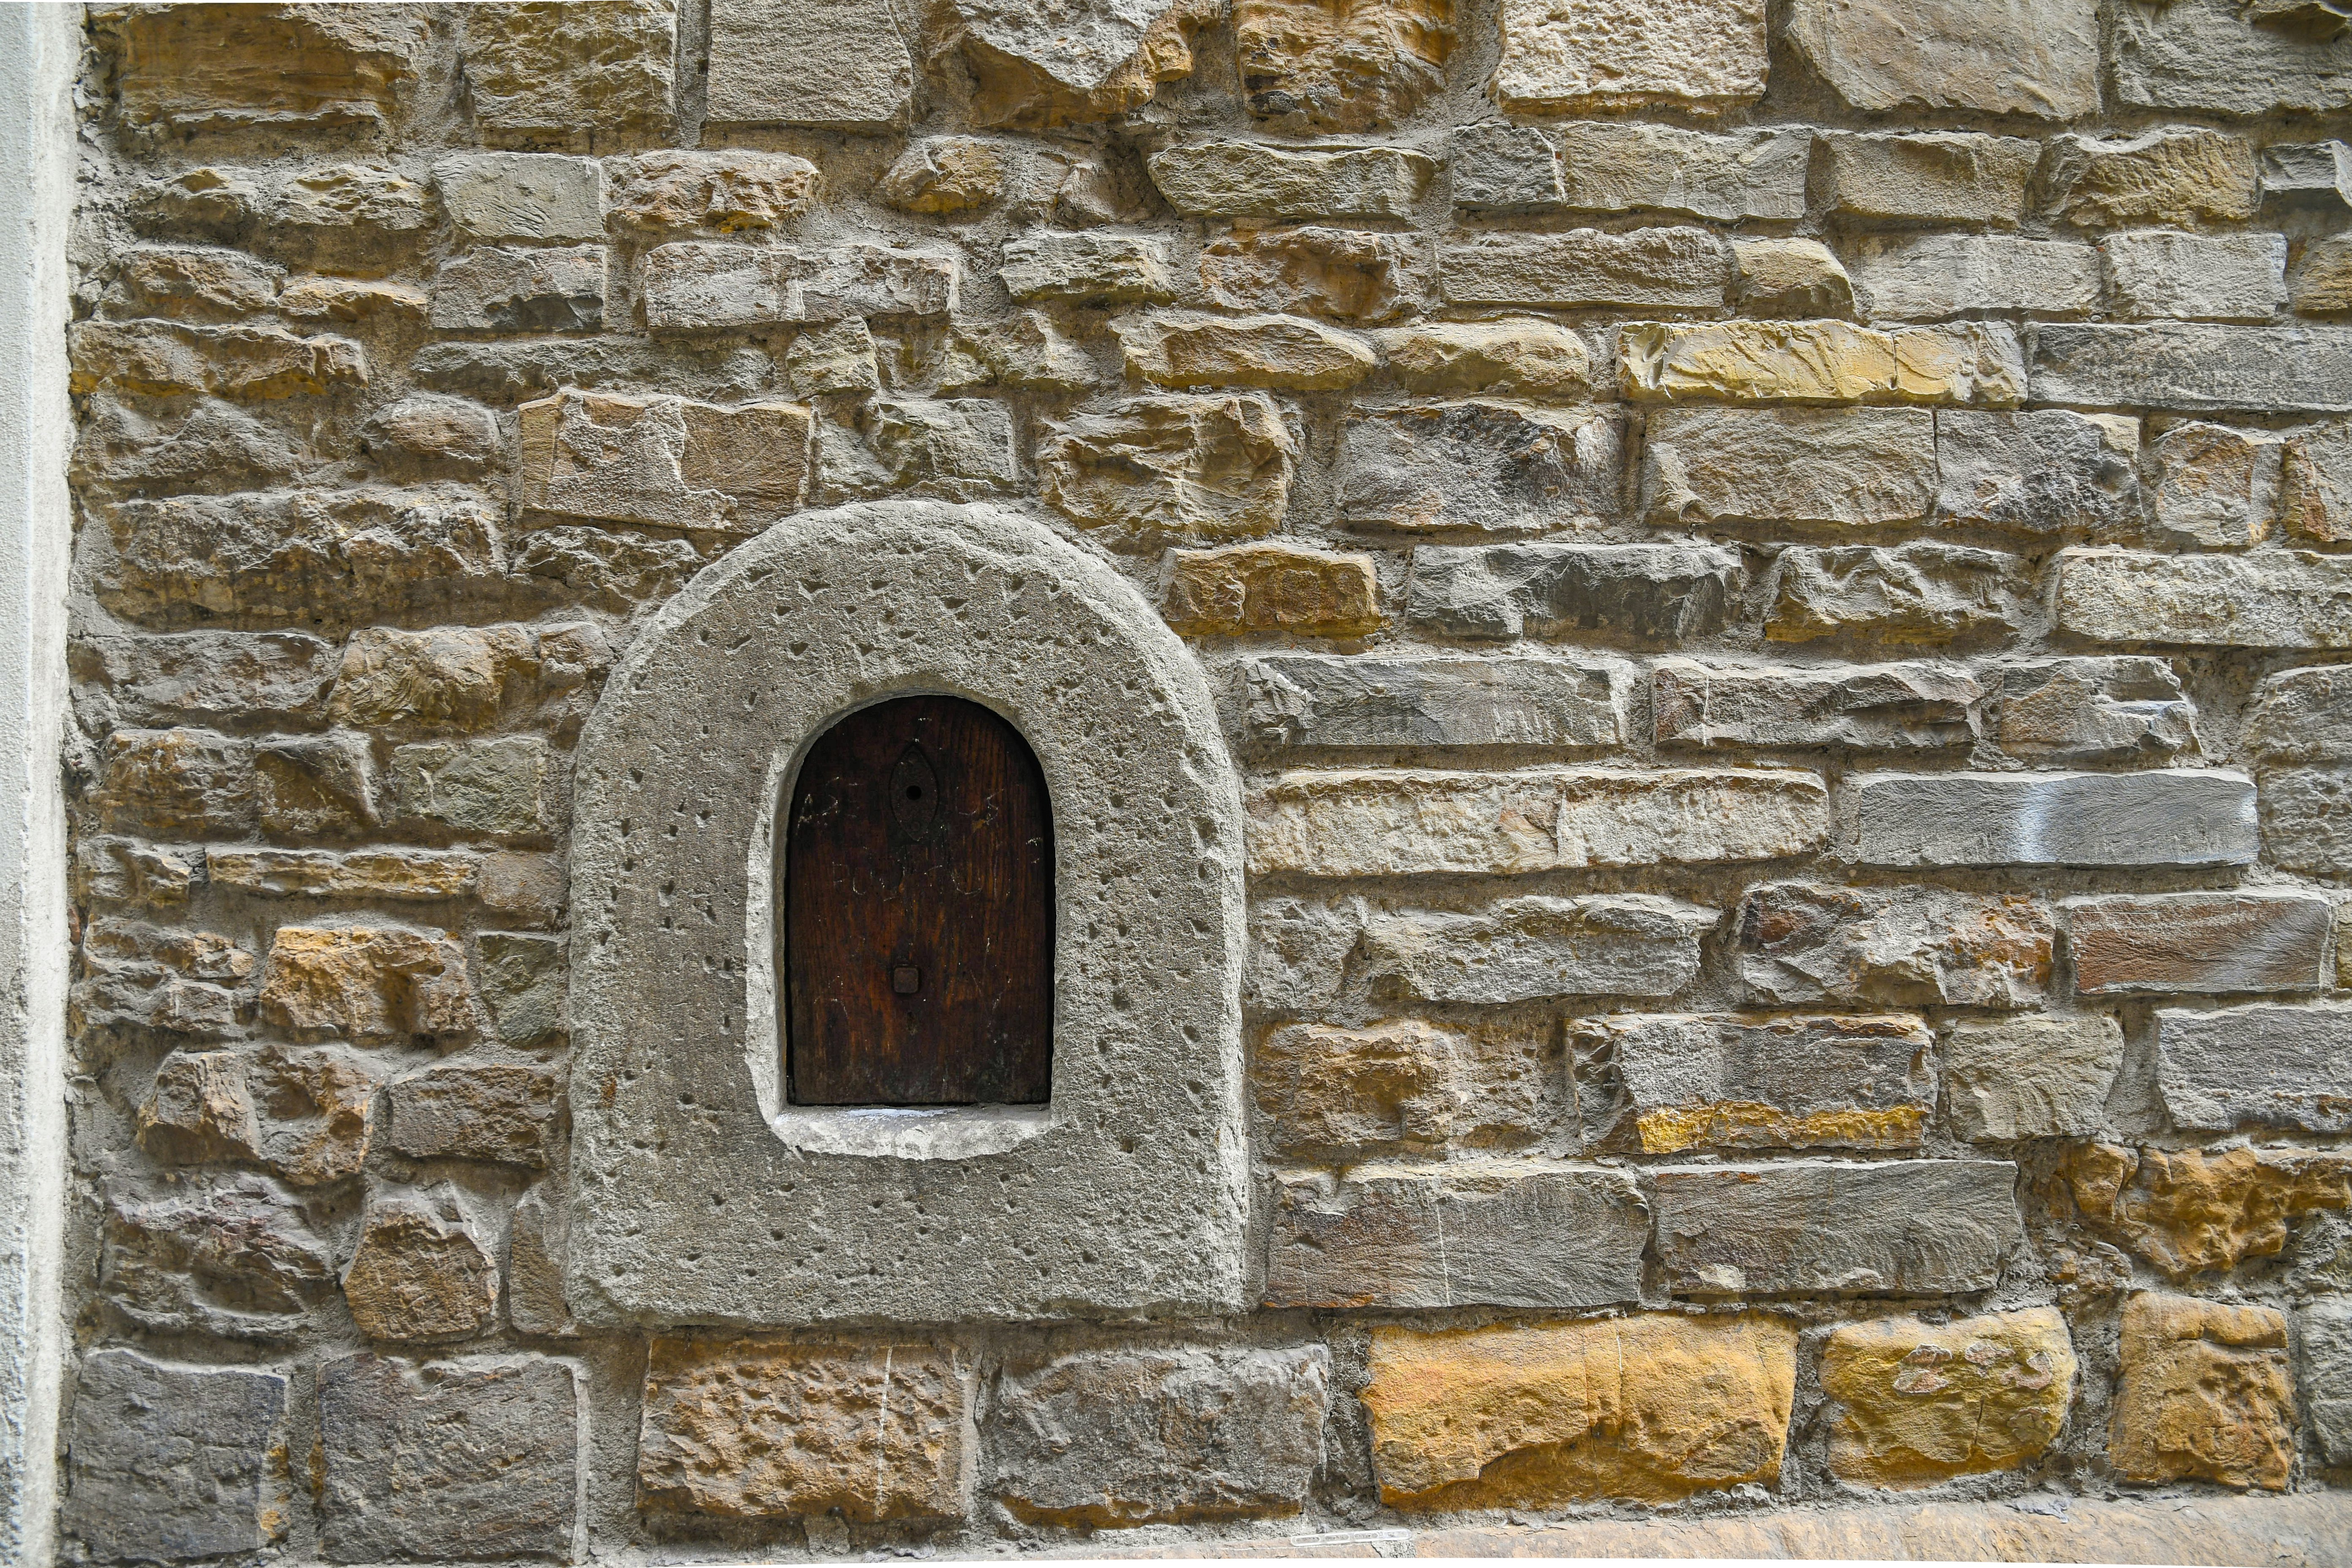 Close-up of a wine window (buchetta del vino), used in the past to sell wine directly to passers-by, on the old stone wall of an ancient building